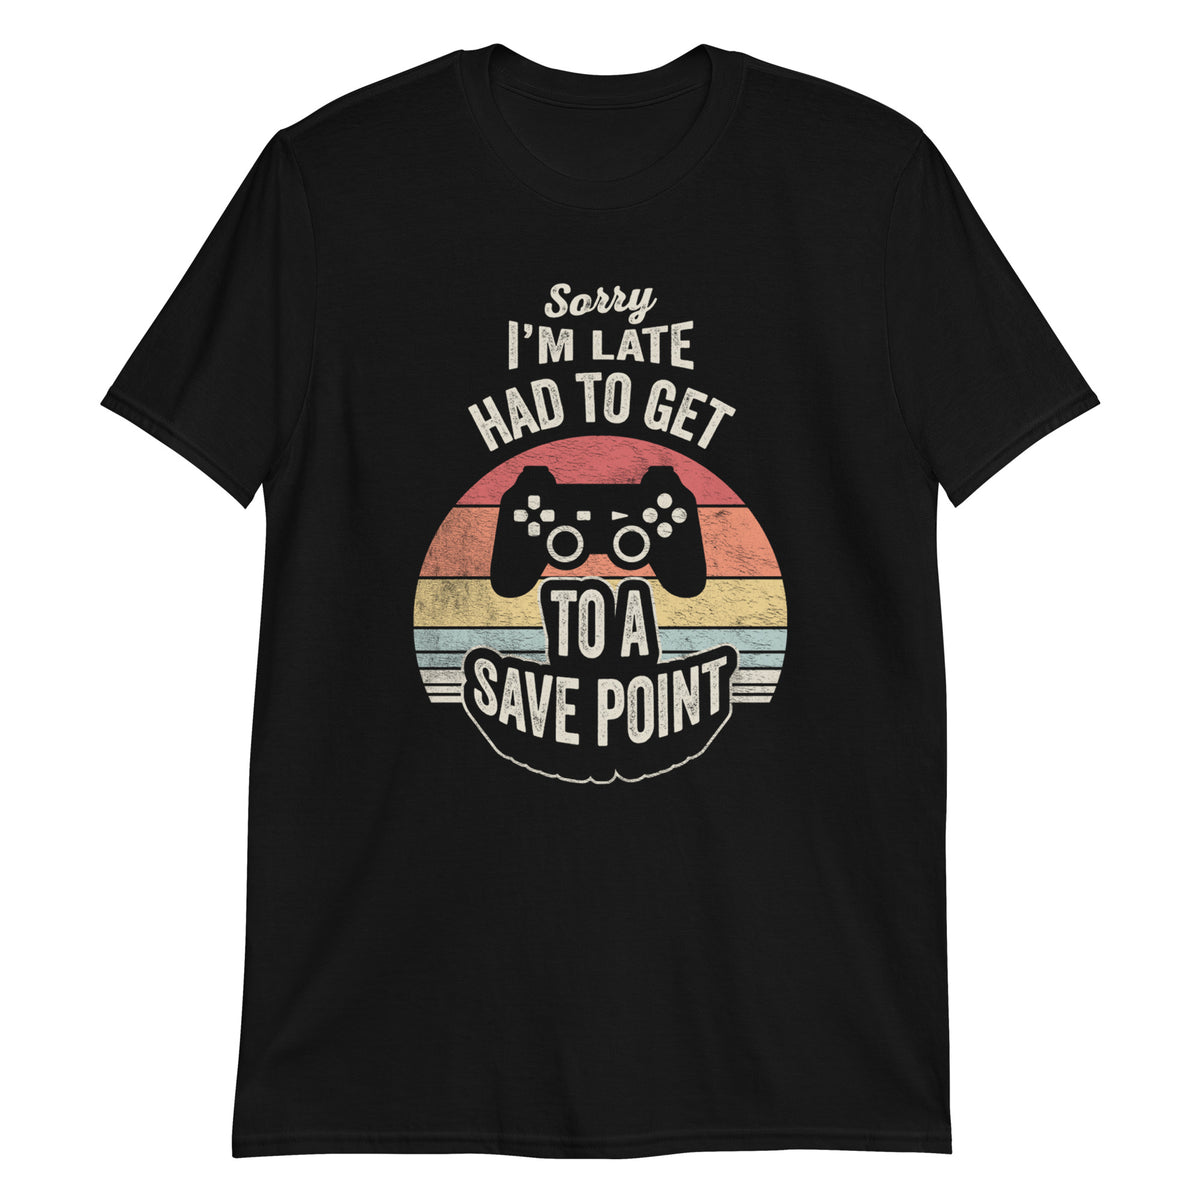 Sorry I'm Late Had to Get to Save Point T-Shirt